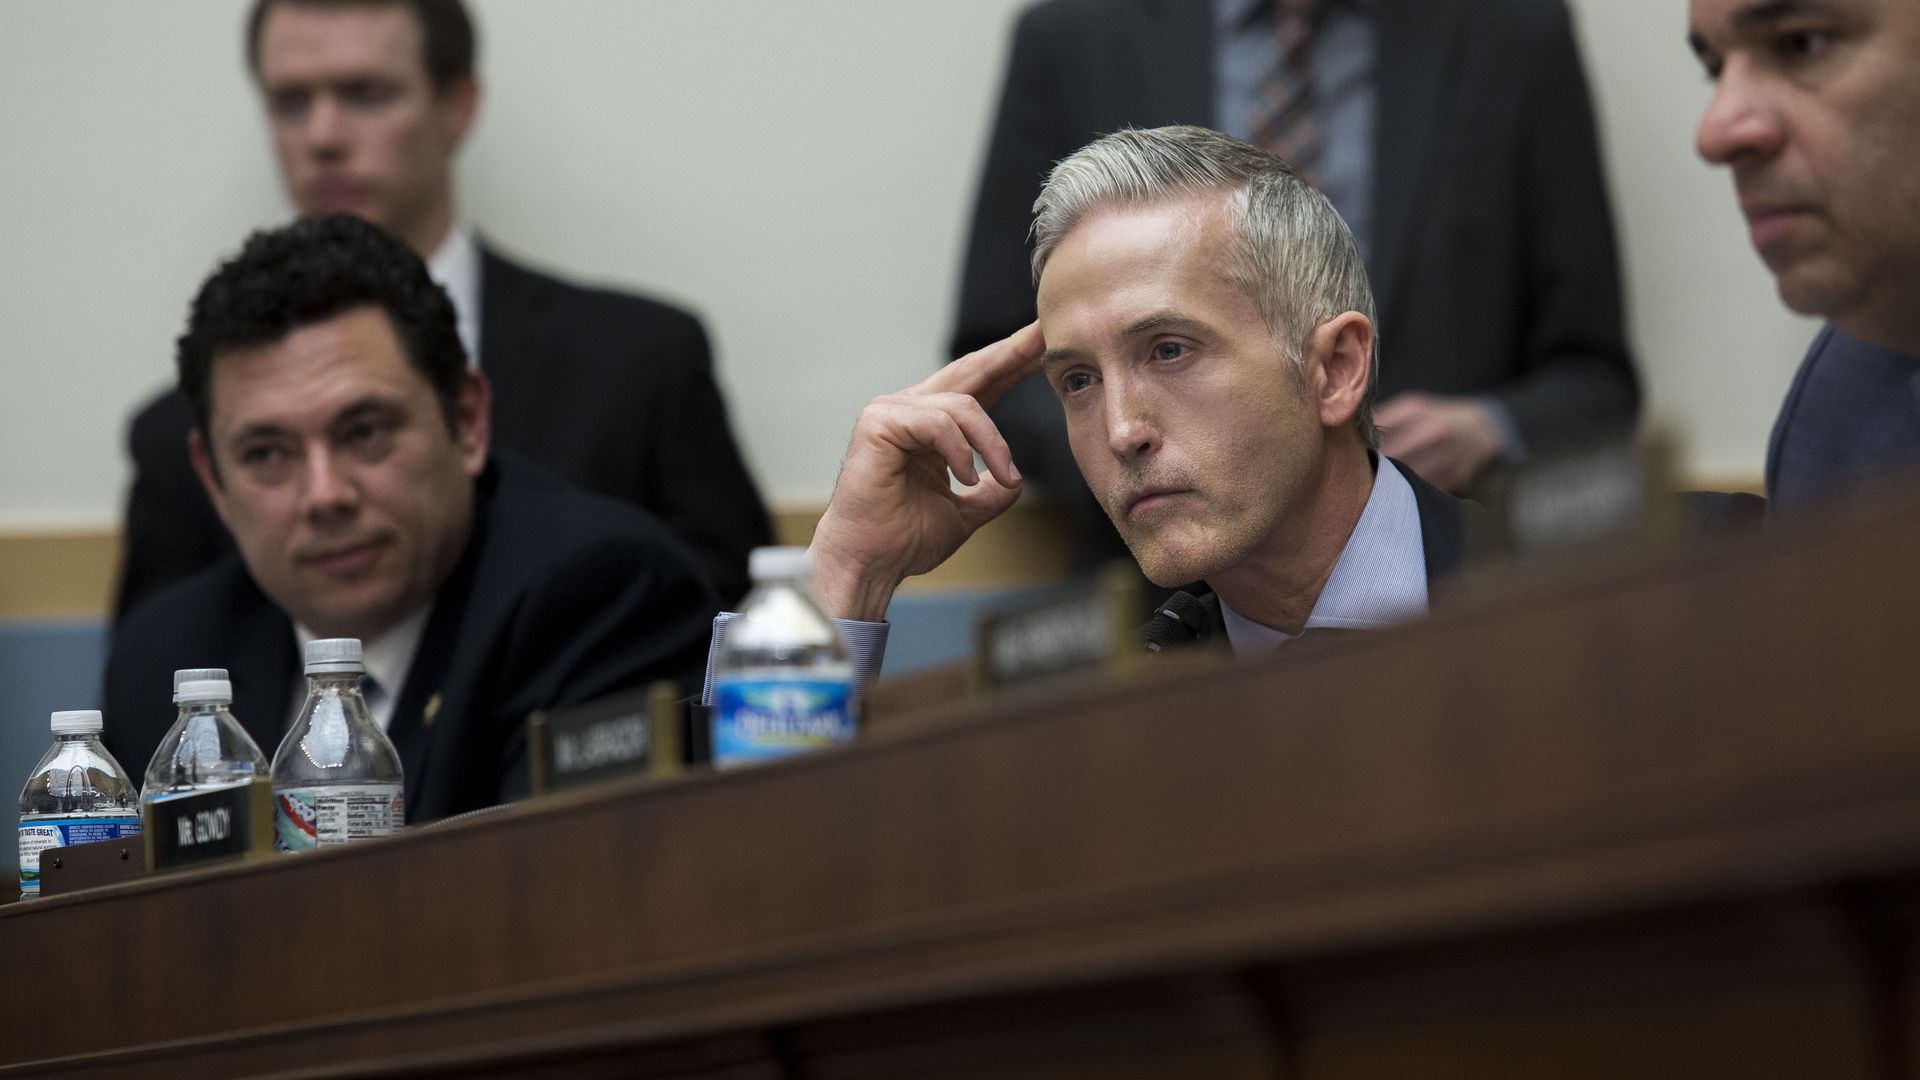 Rep. Trey Gowdy during a House Judiciary Committee hearing.